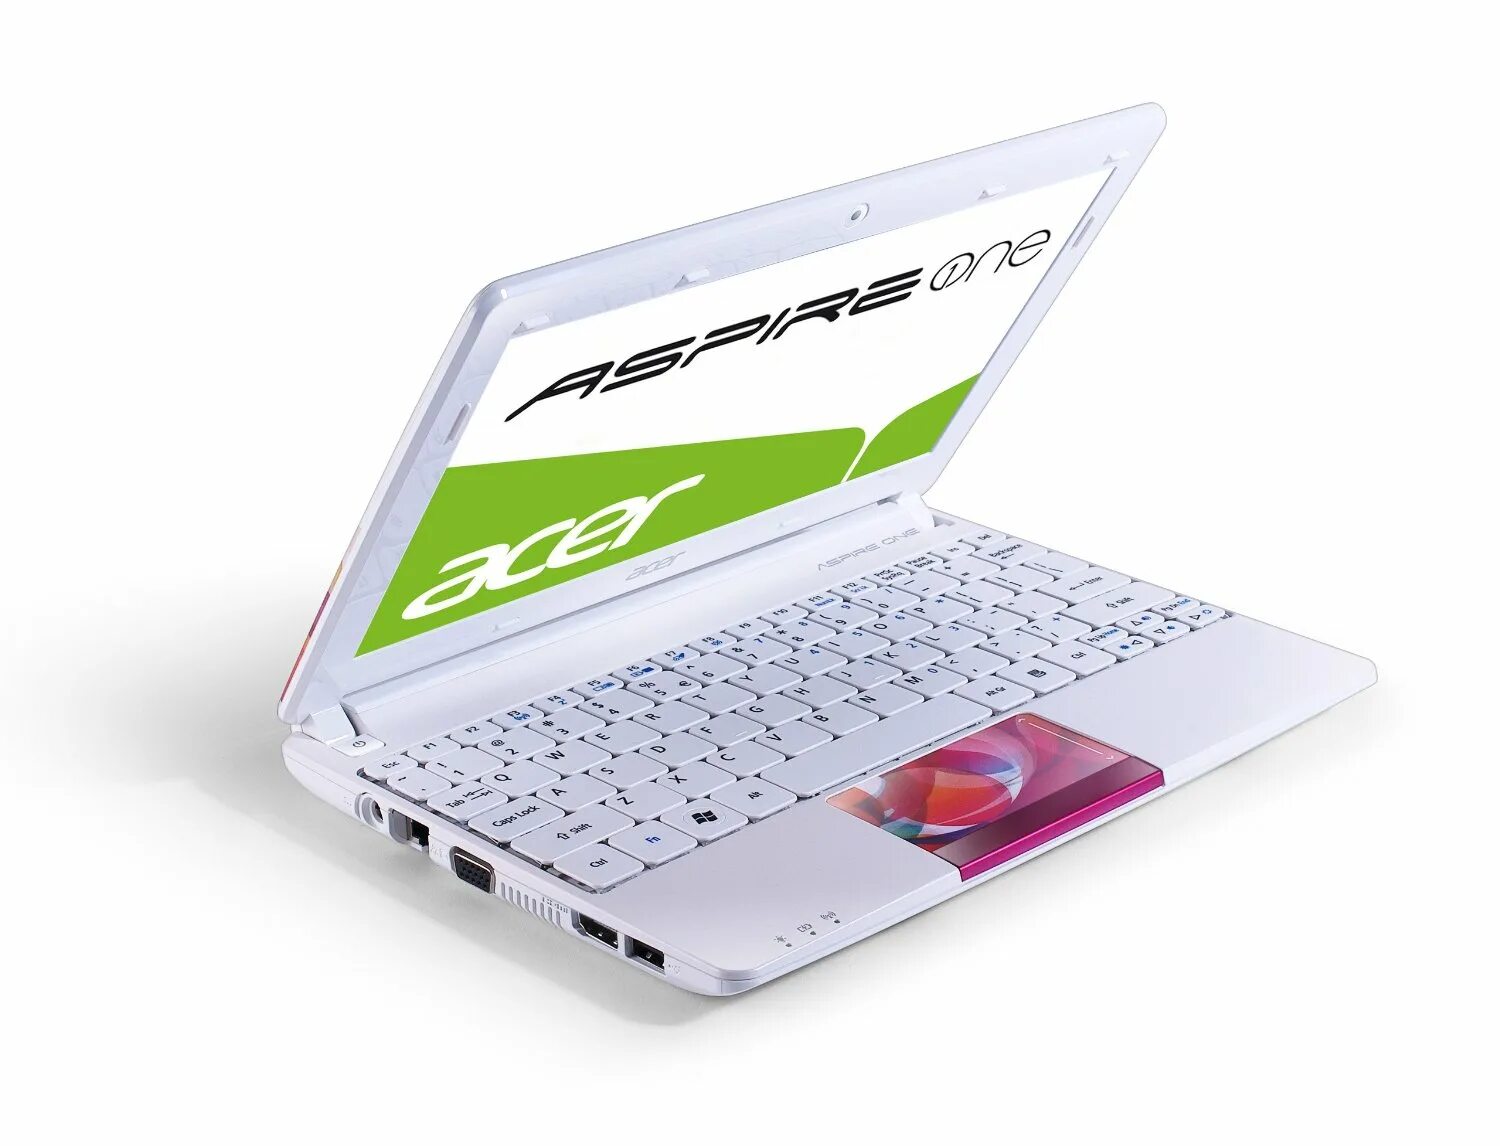 Aspire one цена. Acer Aspire one d270. Ноутбук Acer Aspire one d270. D270 Acer Aspire. Acer d270 Acer Aspire one.